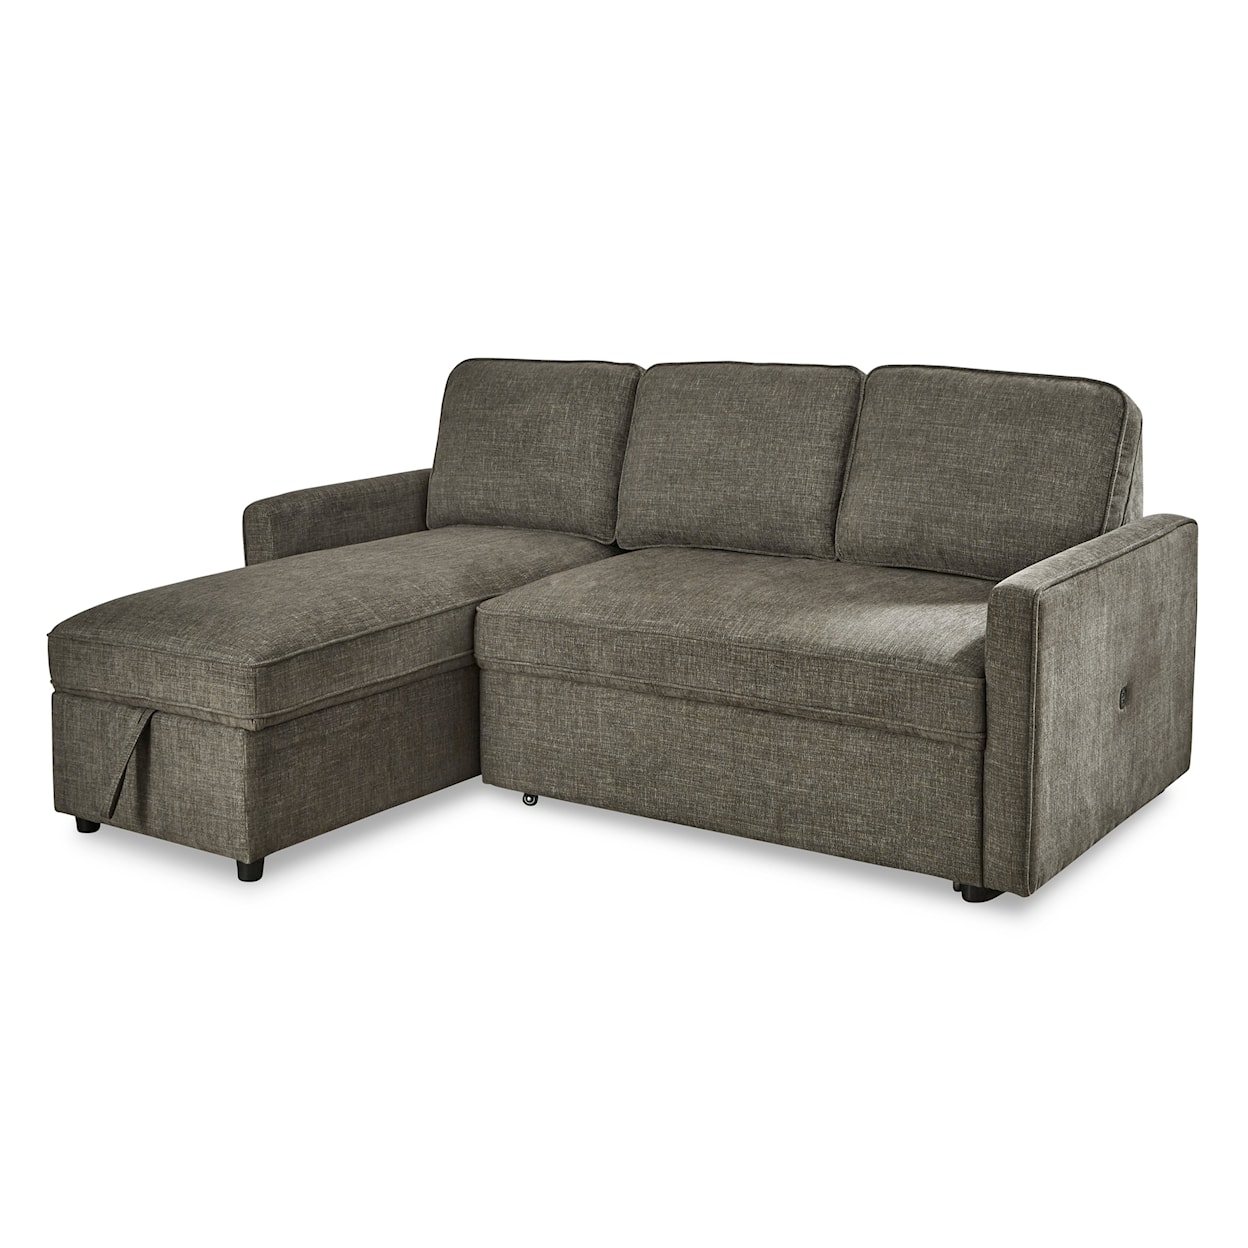 Ashley Furniture Signature Design Kerle 2-Piece Sectional with Pop Up Bed